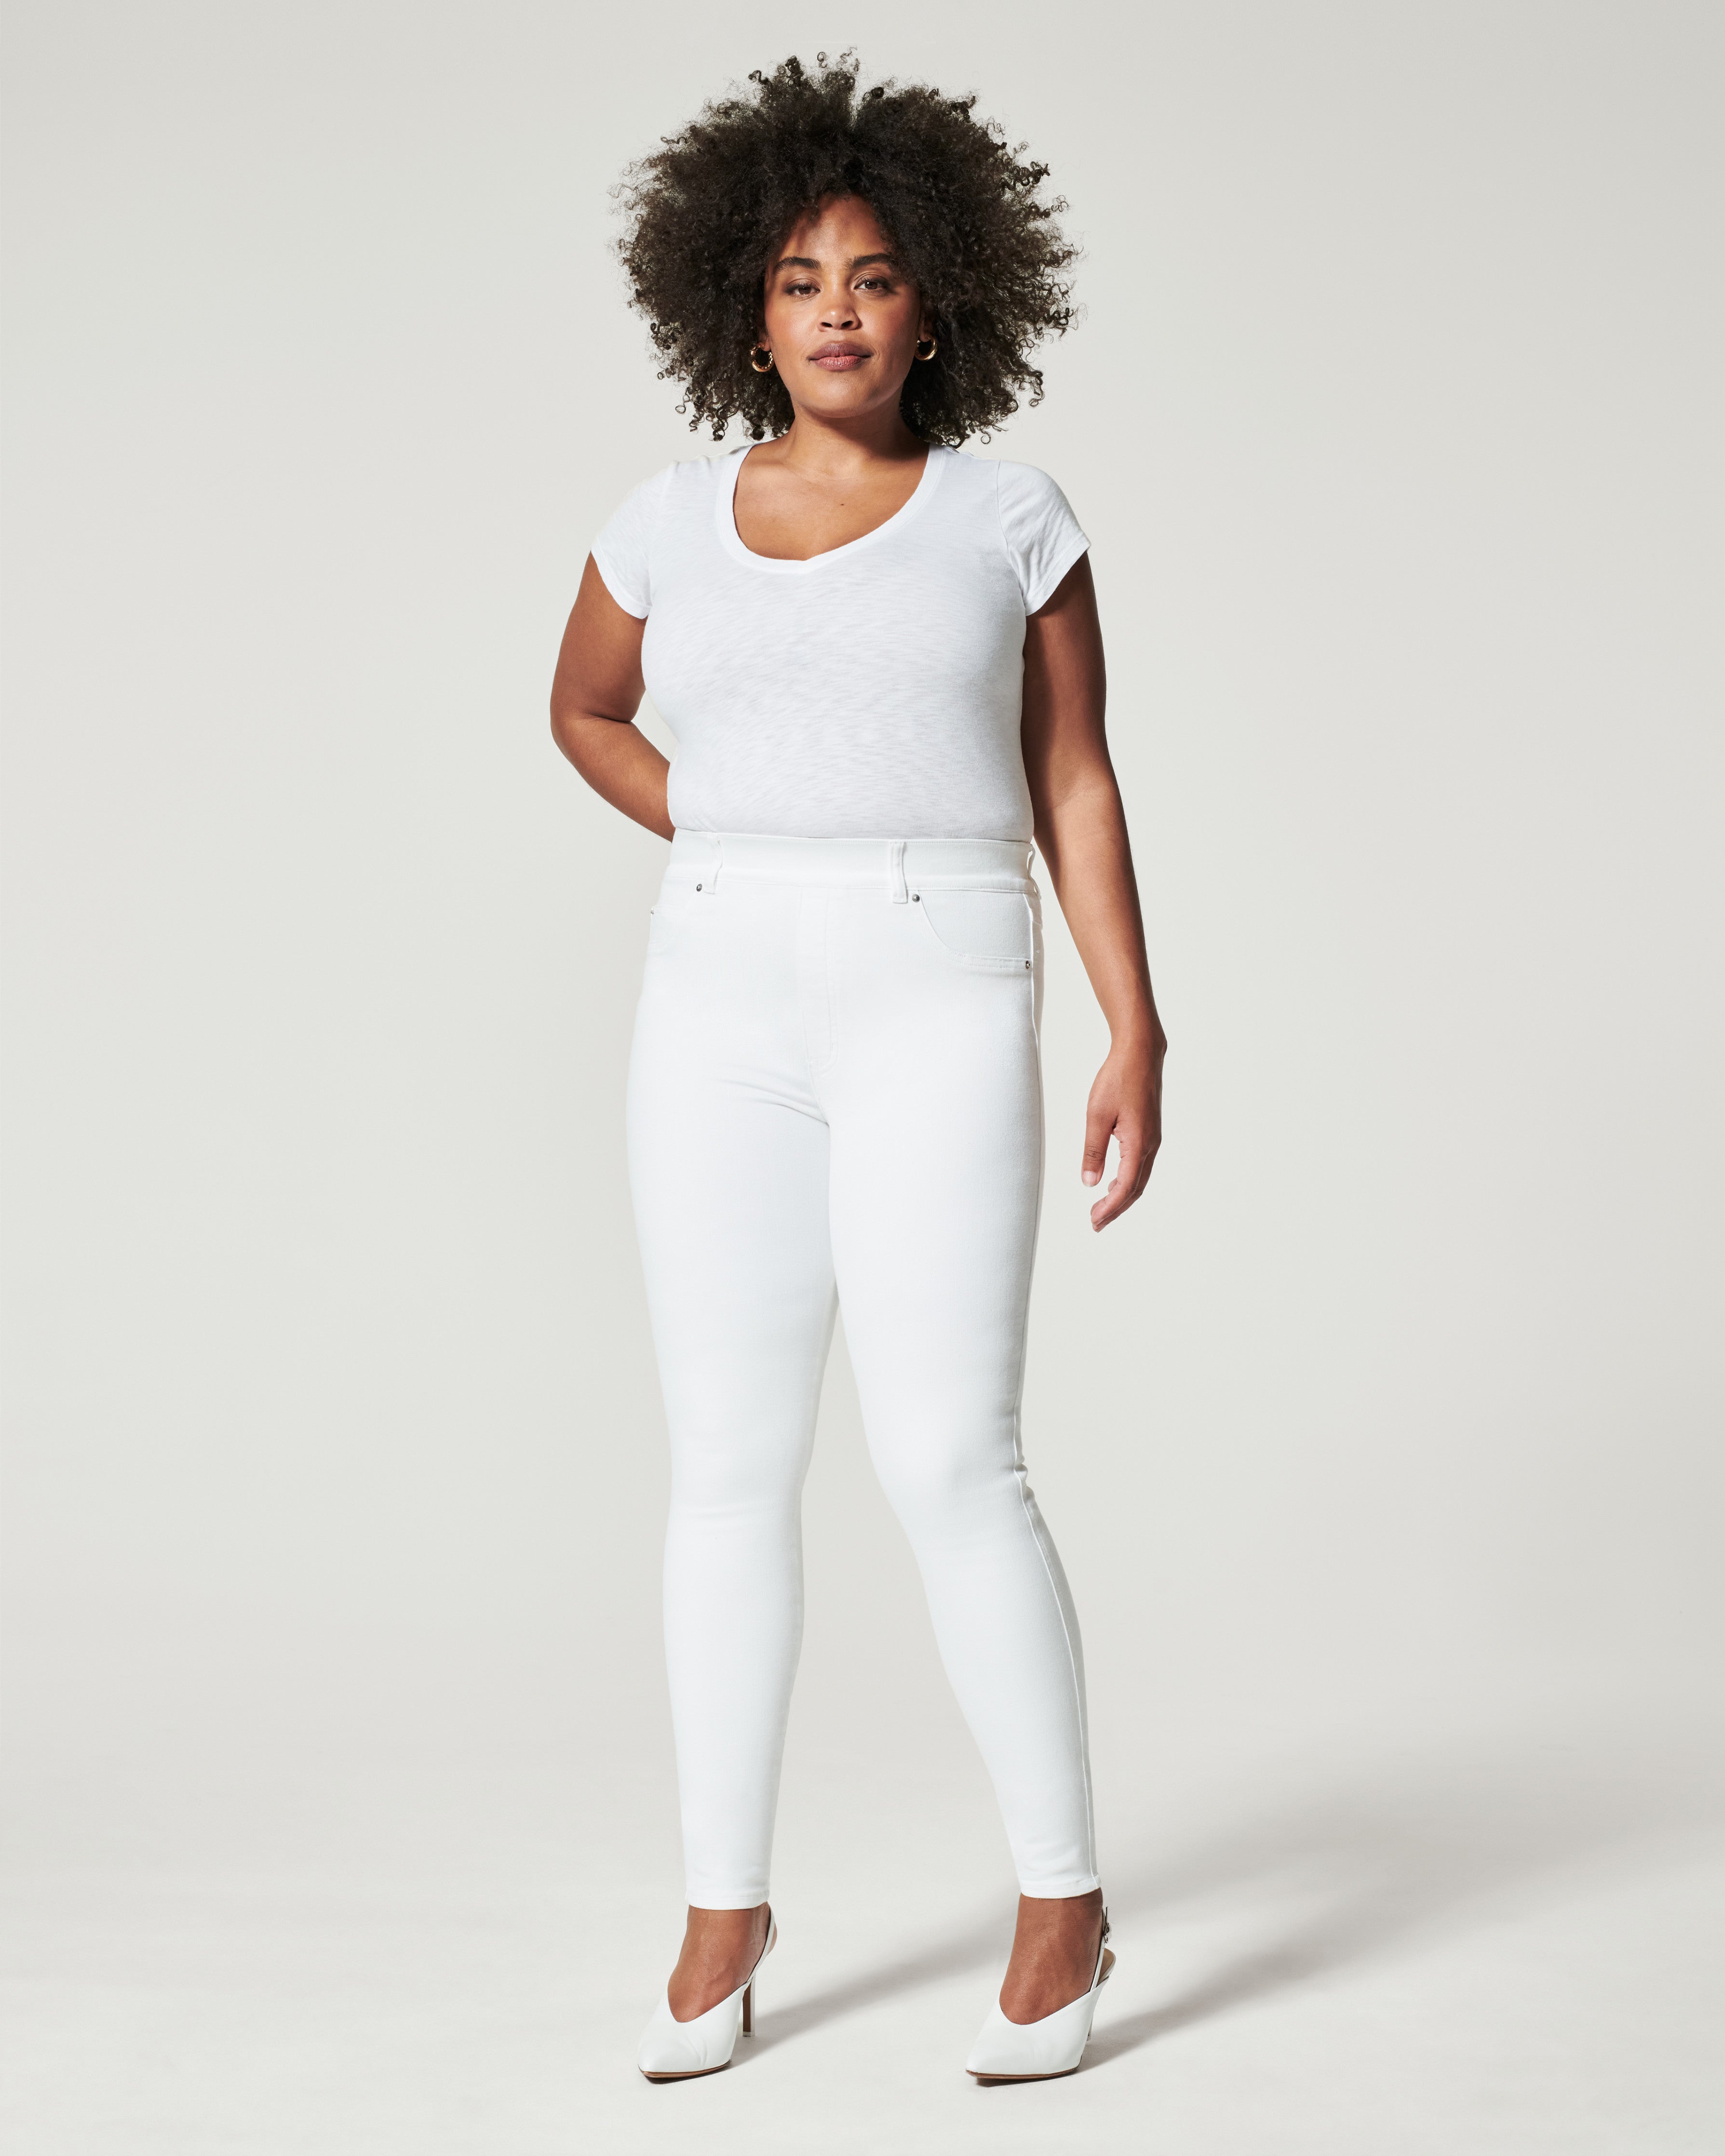 MY NEW FAVORITE WHITE JEANS! Spanx New Arrivals for Your Spring/Summer  Wardrobe 